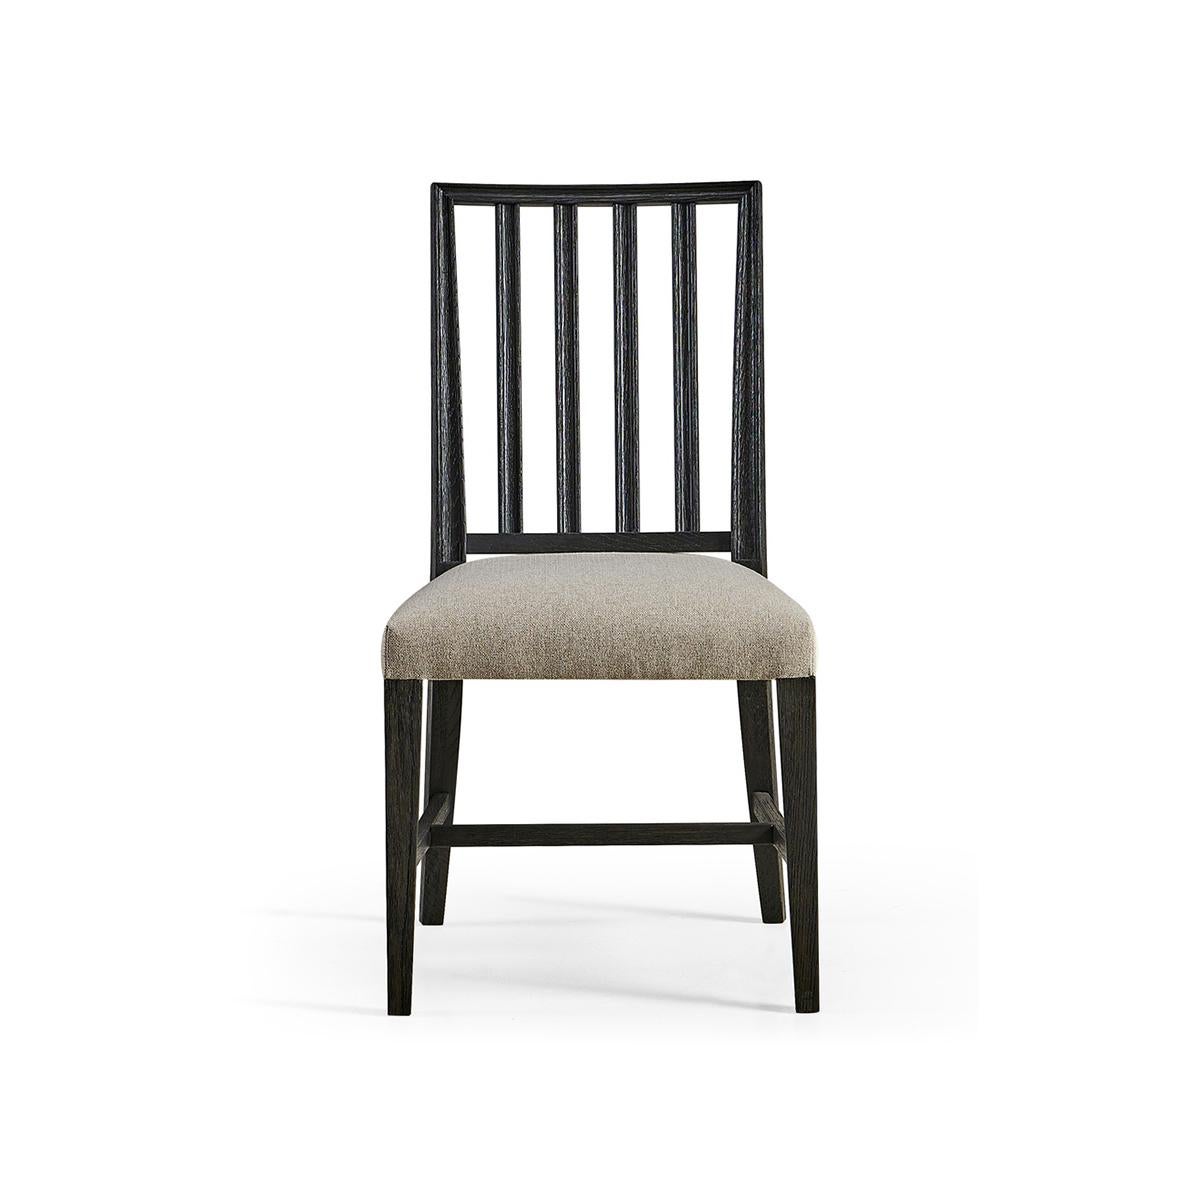 Swedish side chair in an ebonized finish, with pristine forms and clean lines capable of dressing a dining space up or down with ease. With a molded slat back and a delightfully plush cushion upholstered in a creamy oatmeal performance fabric for